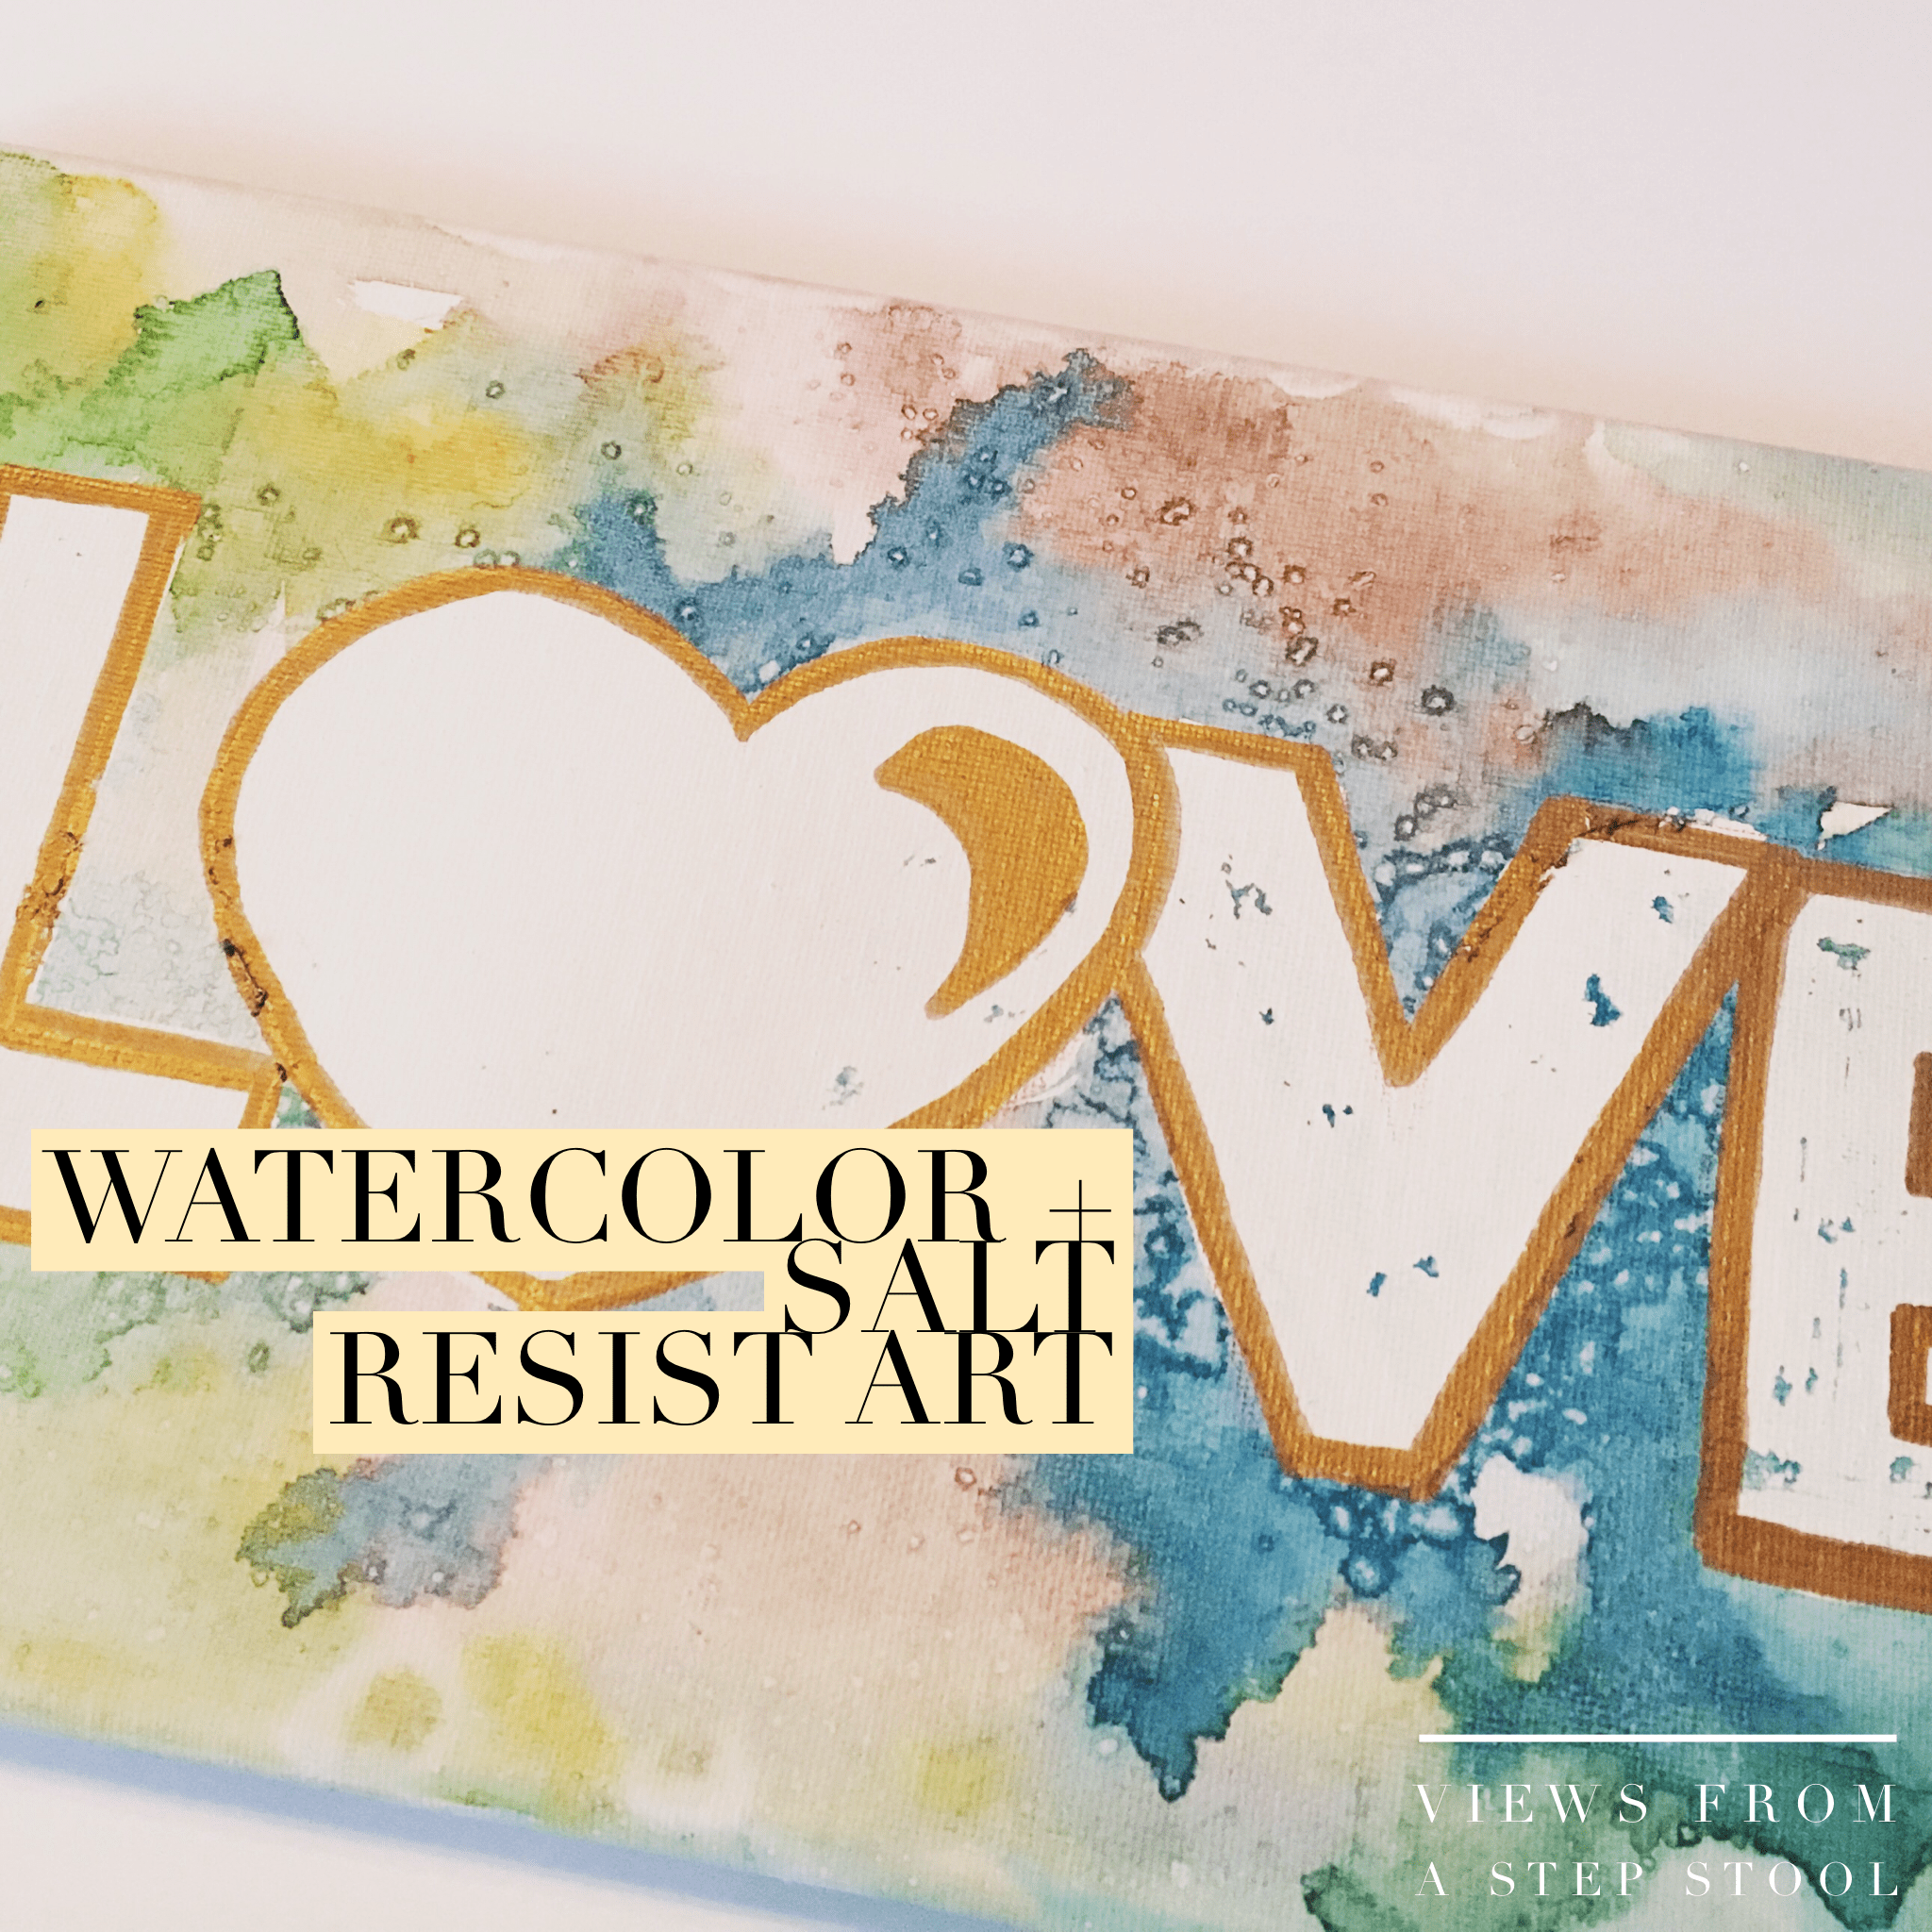 This watercolor resist art can turn a canvas into a beautiful work of art! With rubber cement instead of painter's tape, make any design you want!